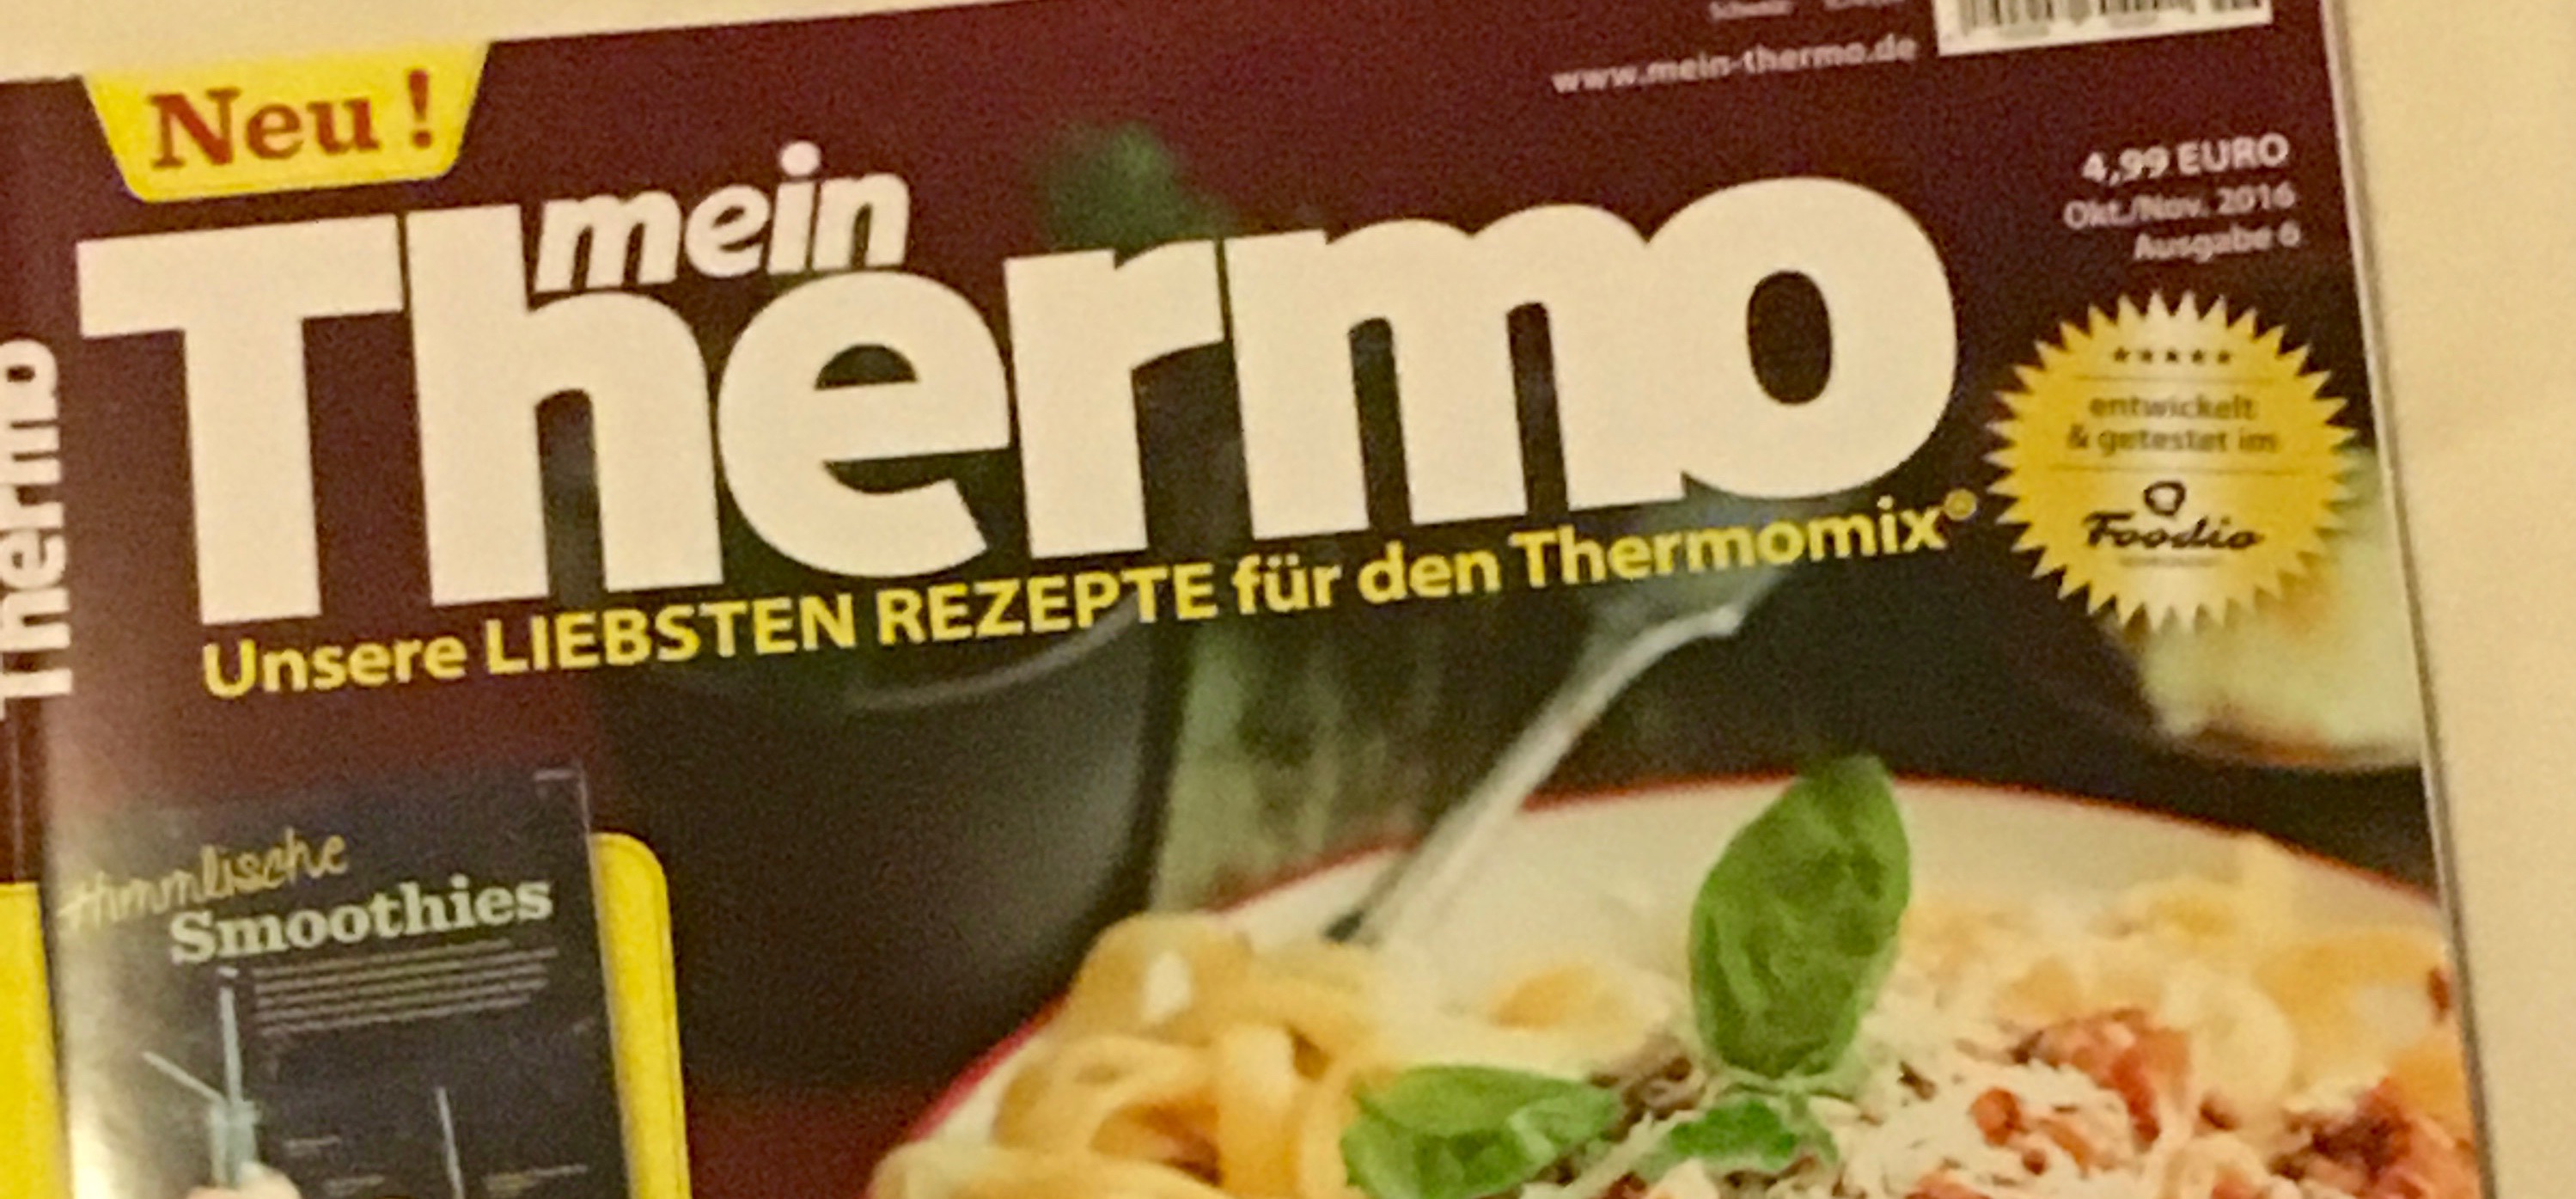 Mein Thermo